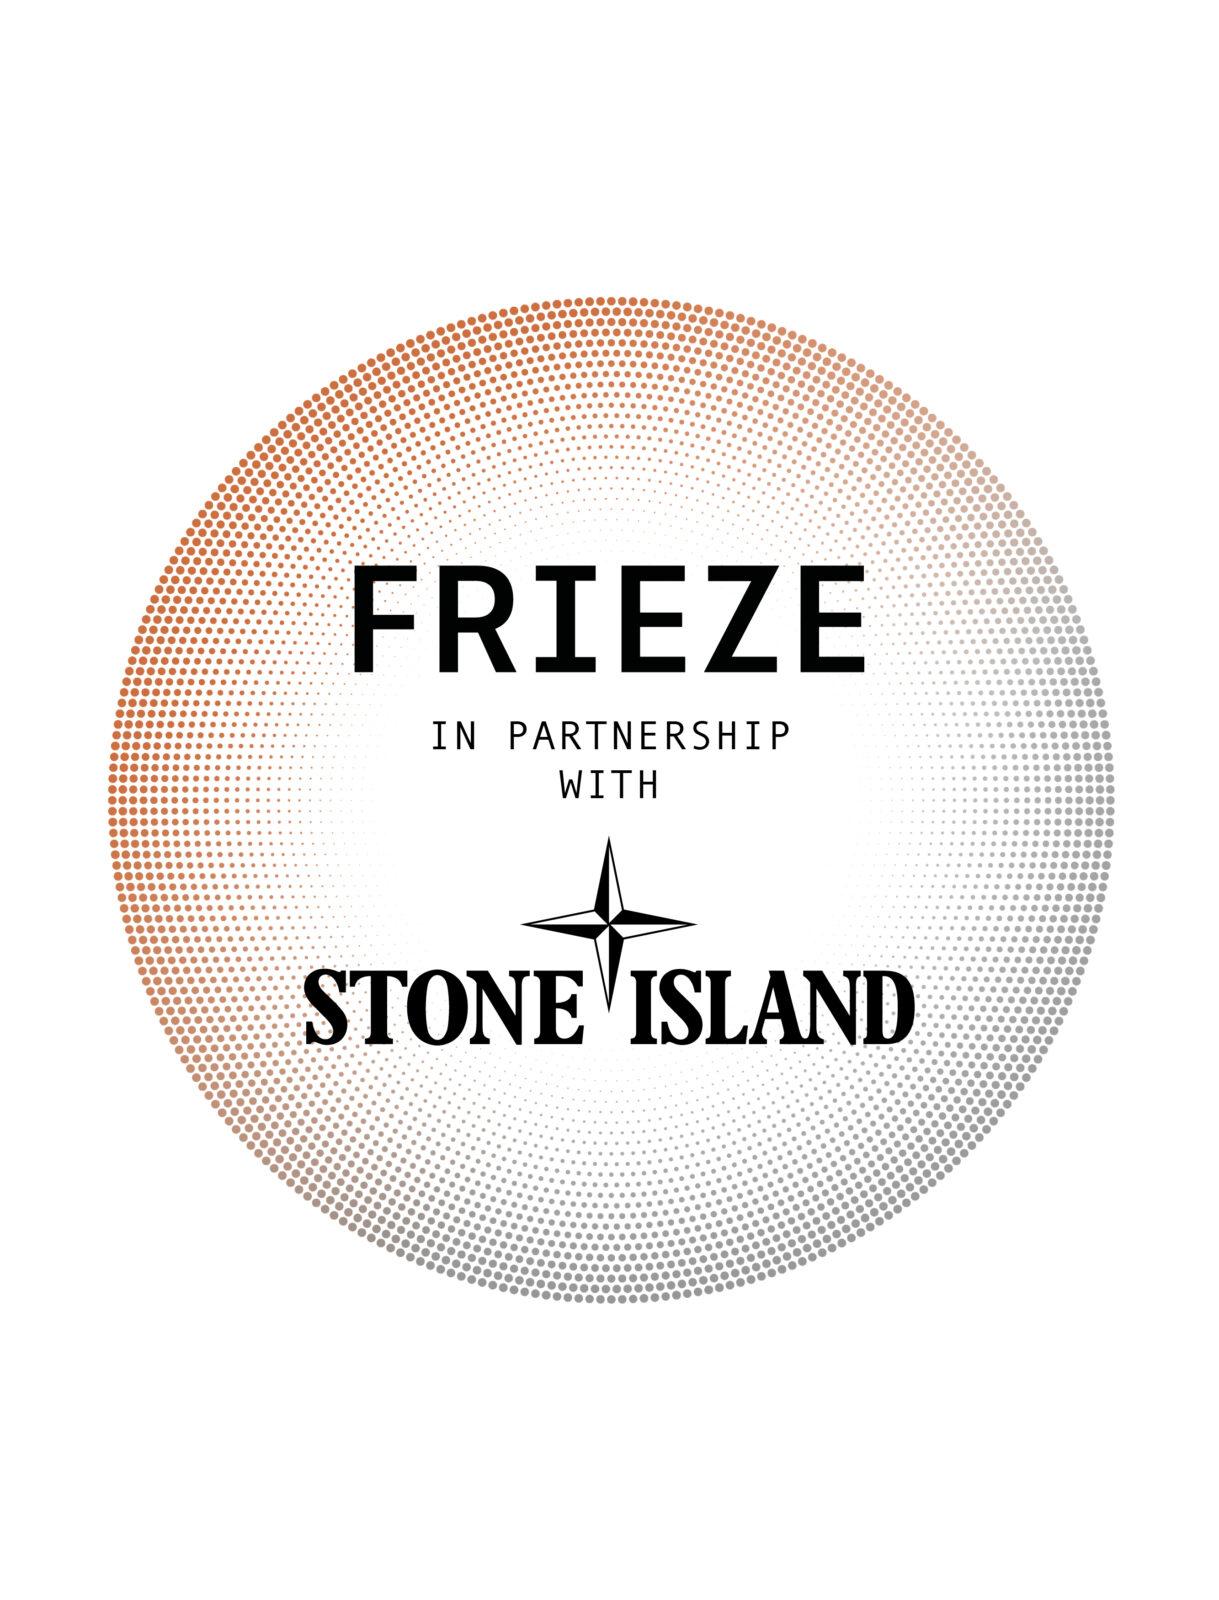 STONE ISLAND BECOMES AN OFFICIAL PARTNER OF FRIEZE